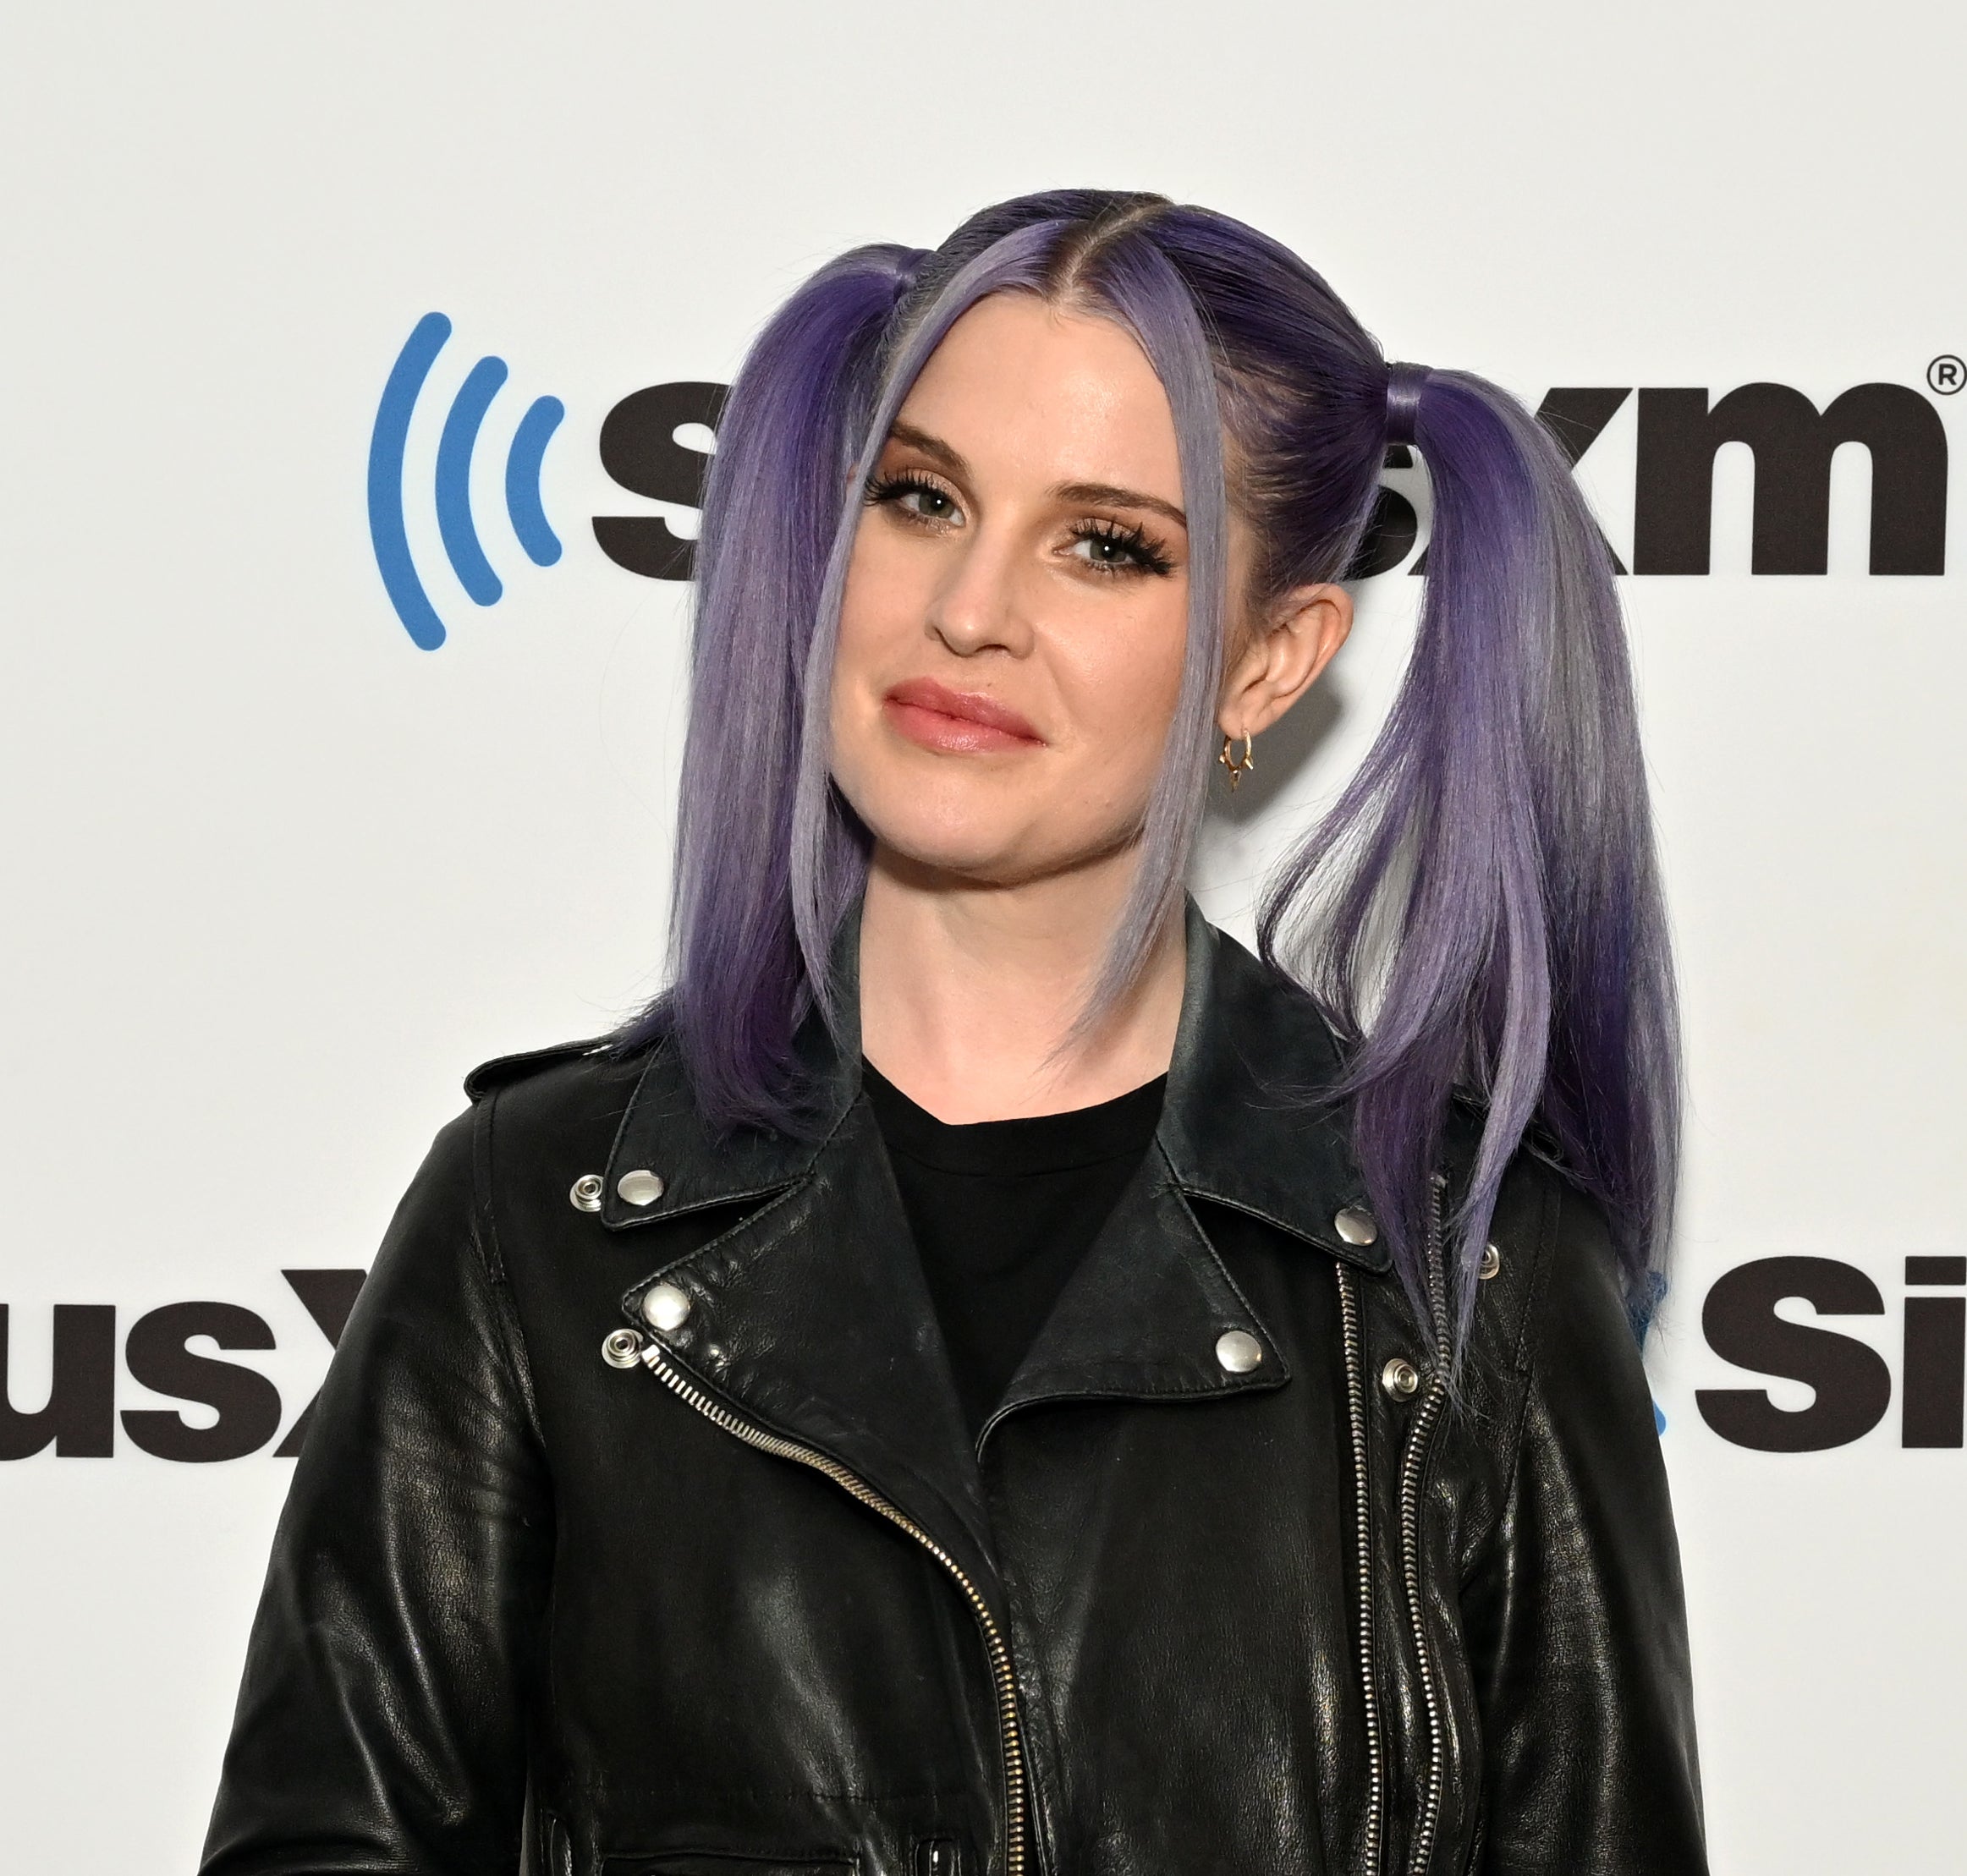 Close-up of Kelly at a media event in pigtails and a leather jacket